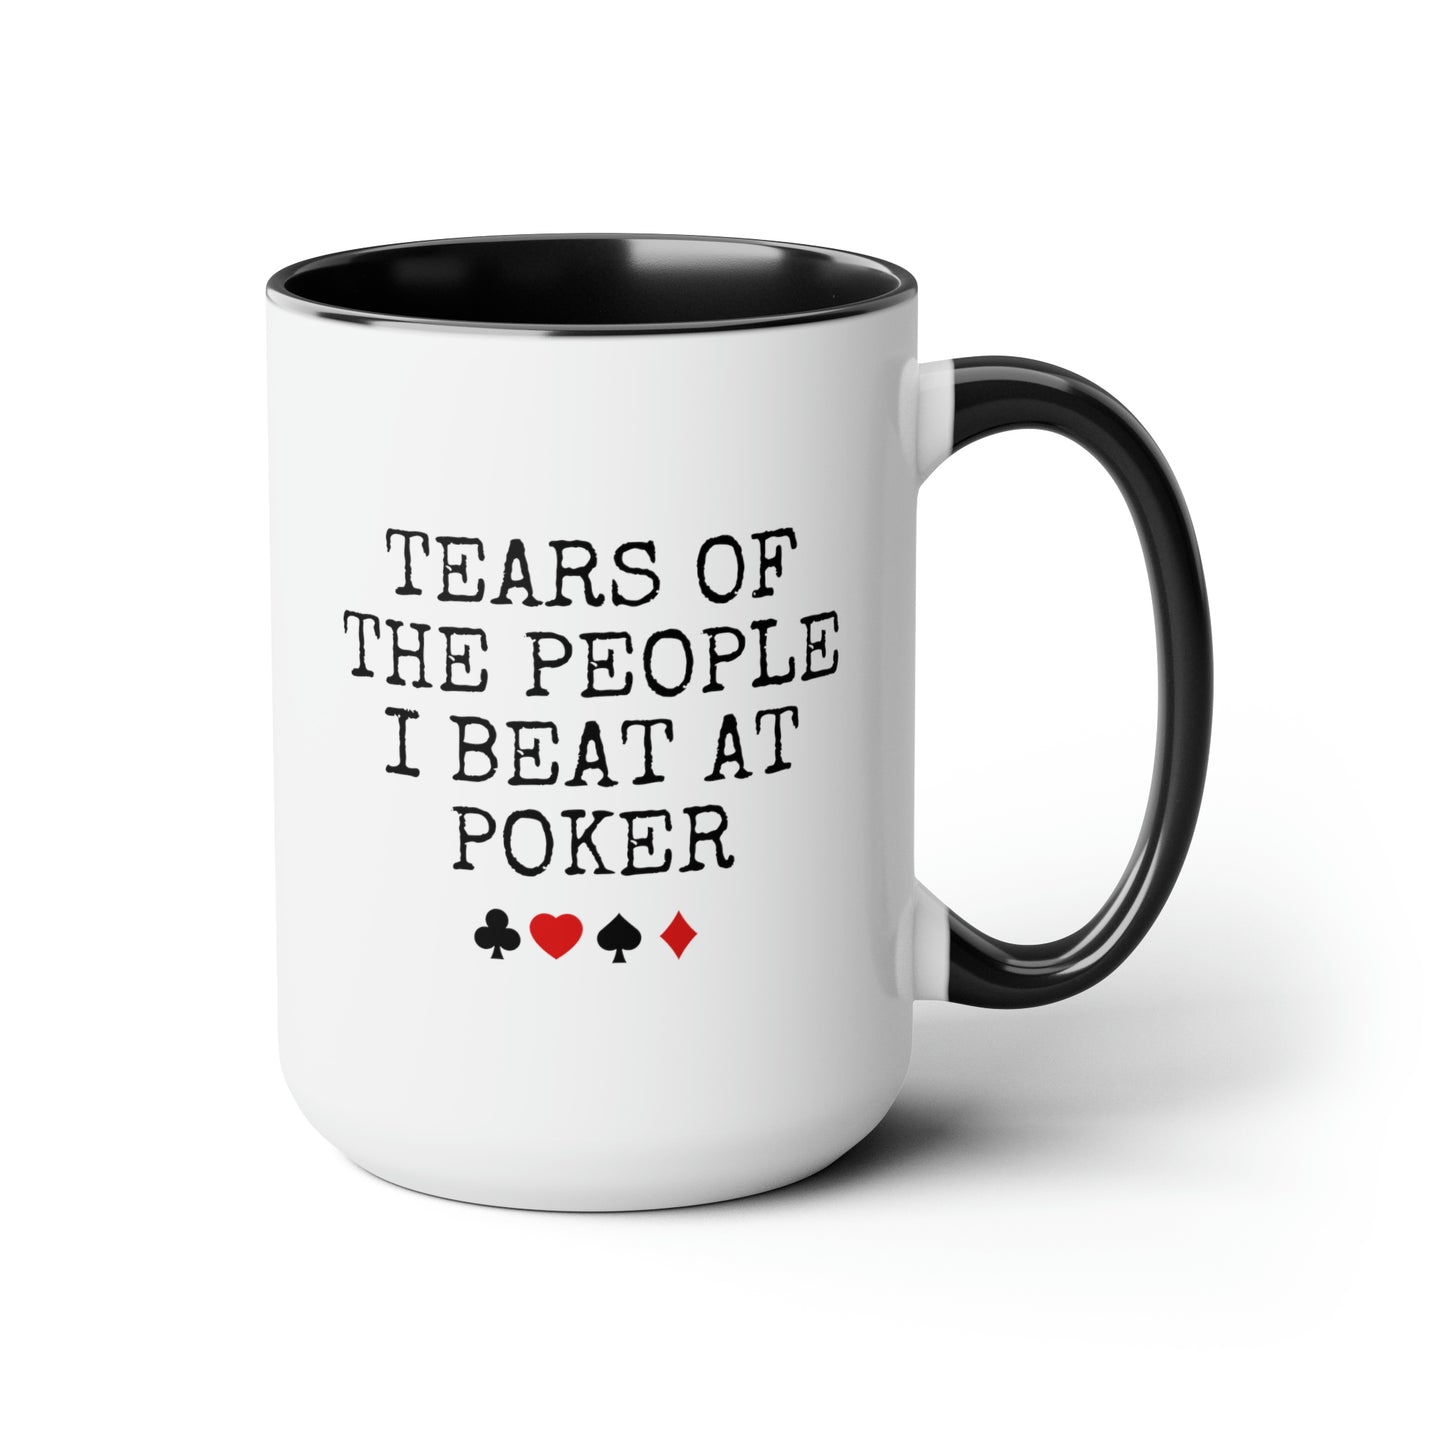 Tears Of The People I Beat At Poker 15oz white with black accent funny large coffee mug gift for poker lover cards player waveywares wavey wares wavywares wavy wares